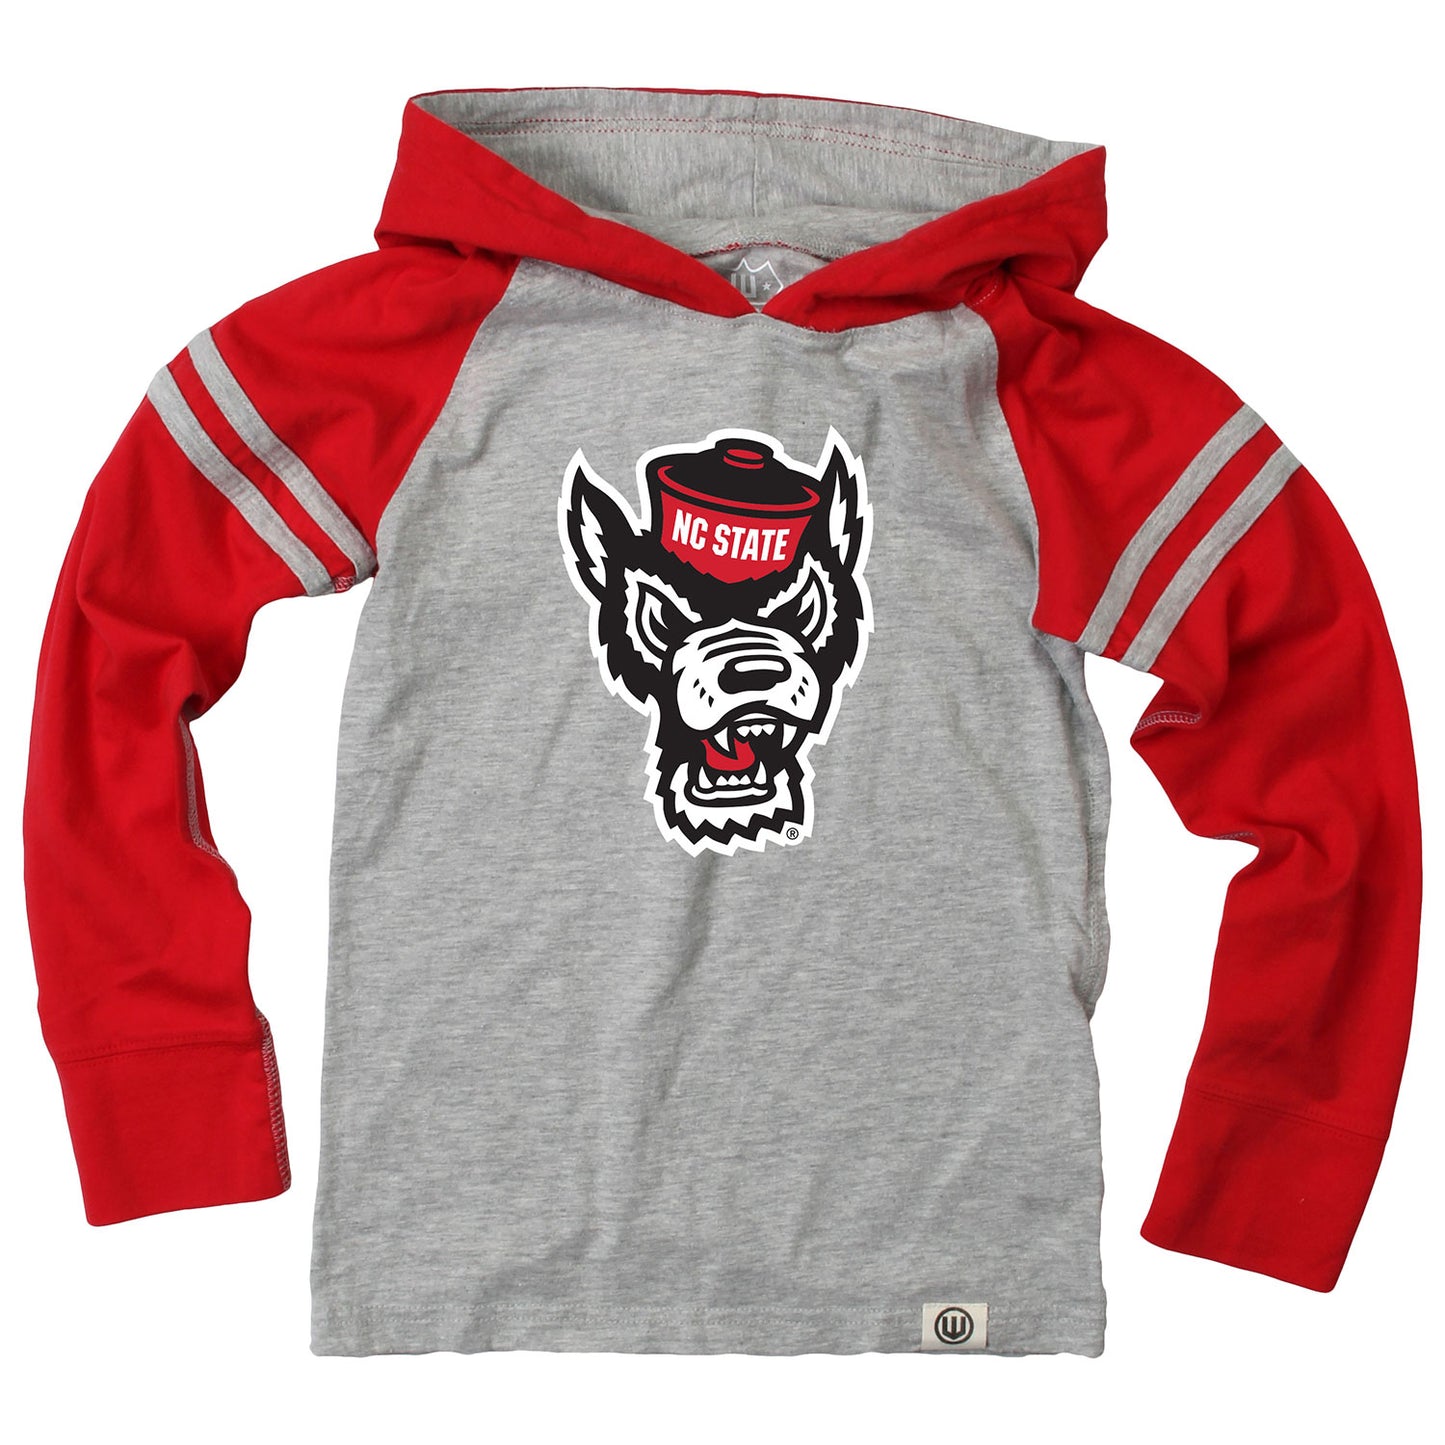 North Carolina State Wolfpack Wes and Willy Youth Boys Long Sleeve Hooded T-Shirt Striped